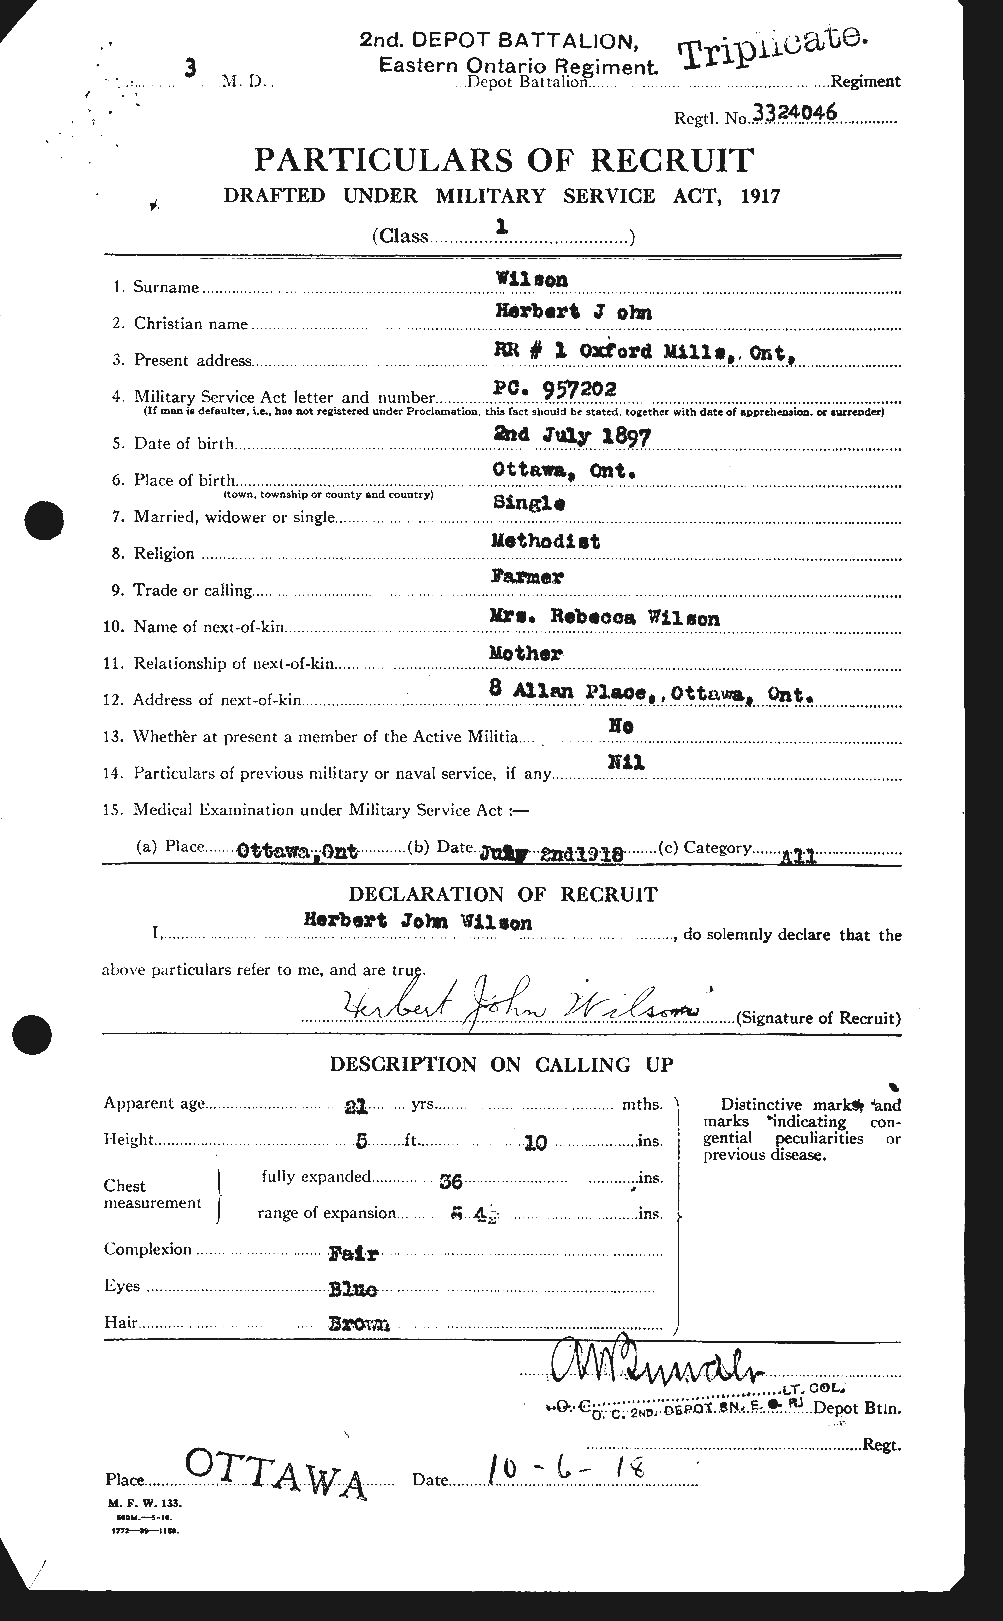 Personnel Records of the First World War - CEF 679568a